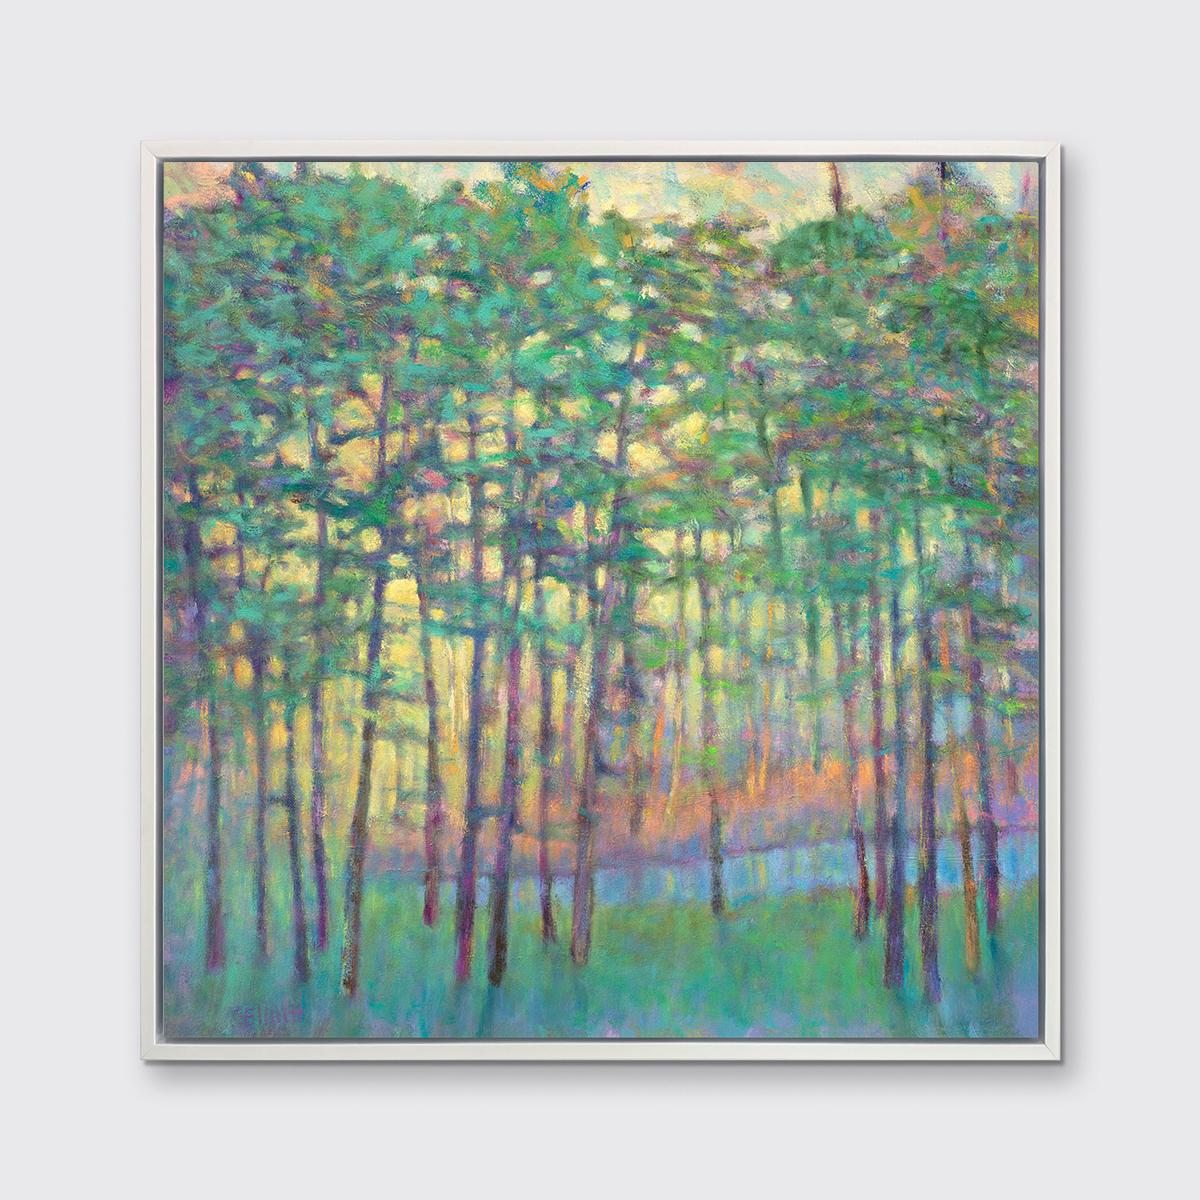 This abstract landscape limited edition print by Ken Elliott features a bright, vibrant palette and an impressionistic style. The forest scene is rendered with a vibrant green connecting the foreground and the leaves of the trees, with warmer